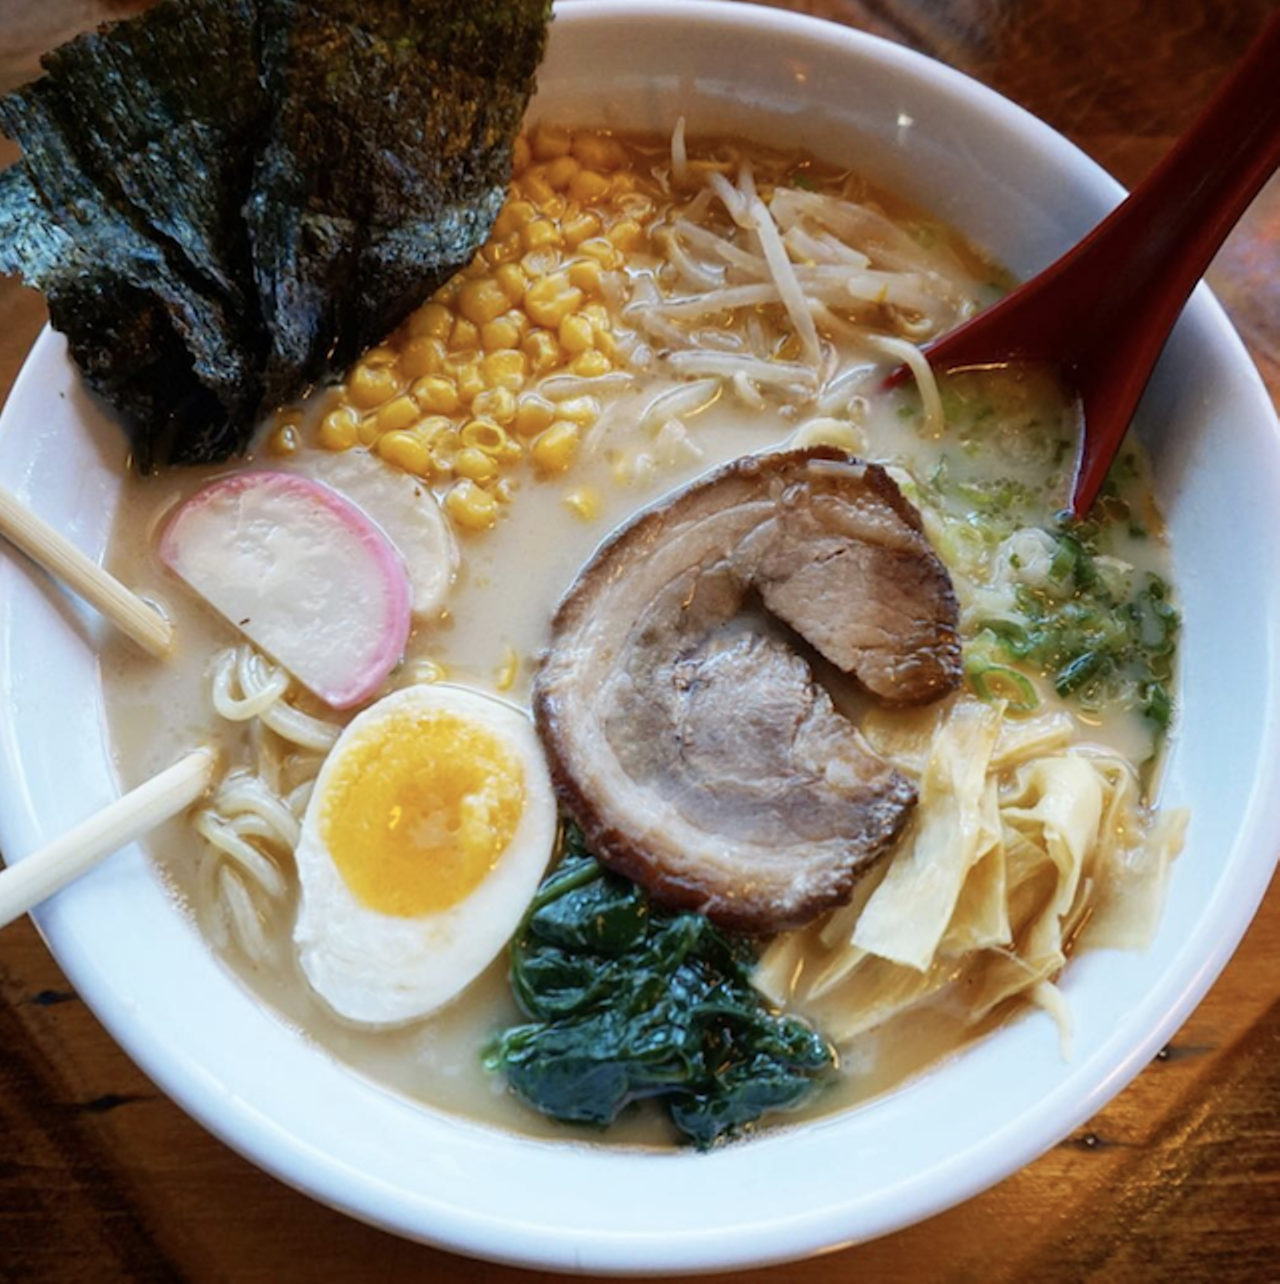 Heat up with a big, steamy bowl of ramen
One can only take so much cold, so warm yourself up with a steamy bowl of ramen. Here’s our list of the 25 essential Asian restaurants in San Antonio.
Photo via sacurrent/Instagram